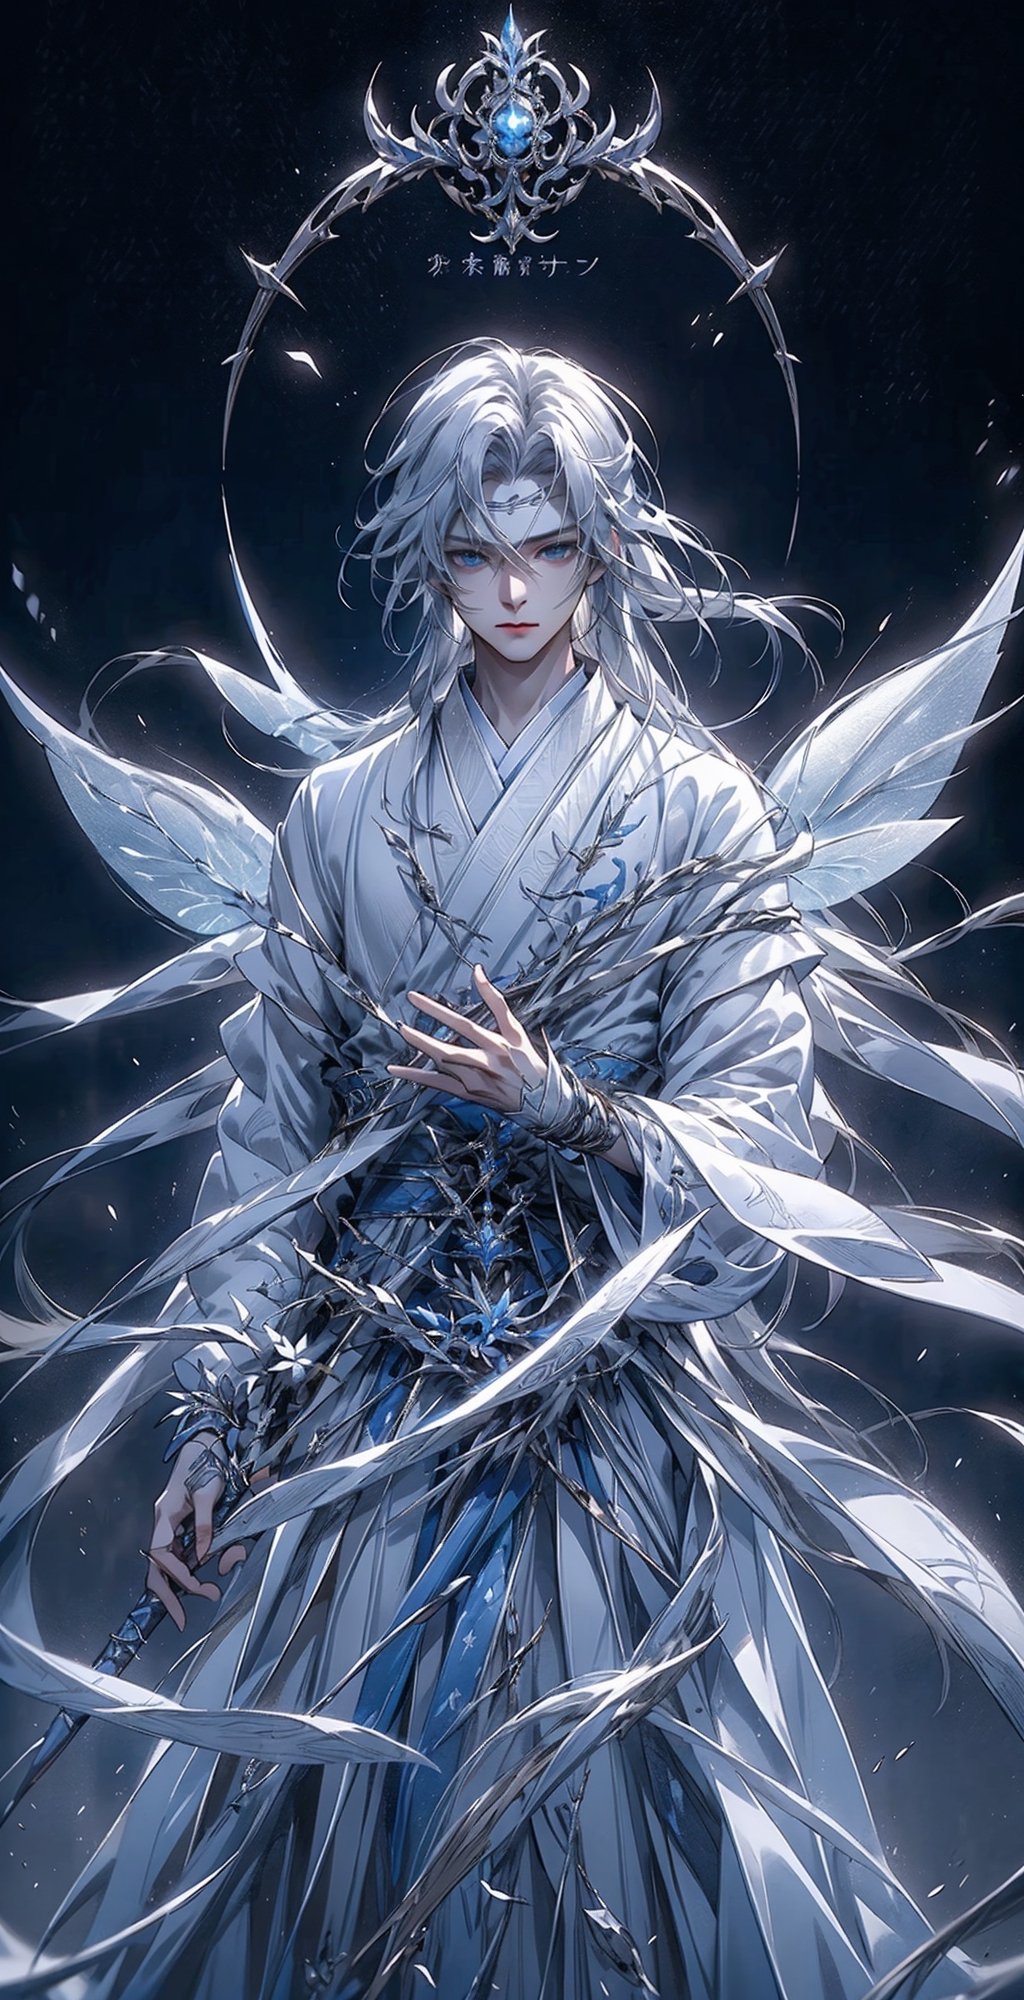 Best, 8k, CG, 1 boy, blue eyes, front face, blue and white clothes, long white hair parted in the middle, fairy spirit, fairy sword, cultivating immortality, calmness, handsomeness, masterpiece,yiwenrudao\(xiuxian\)